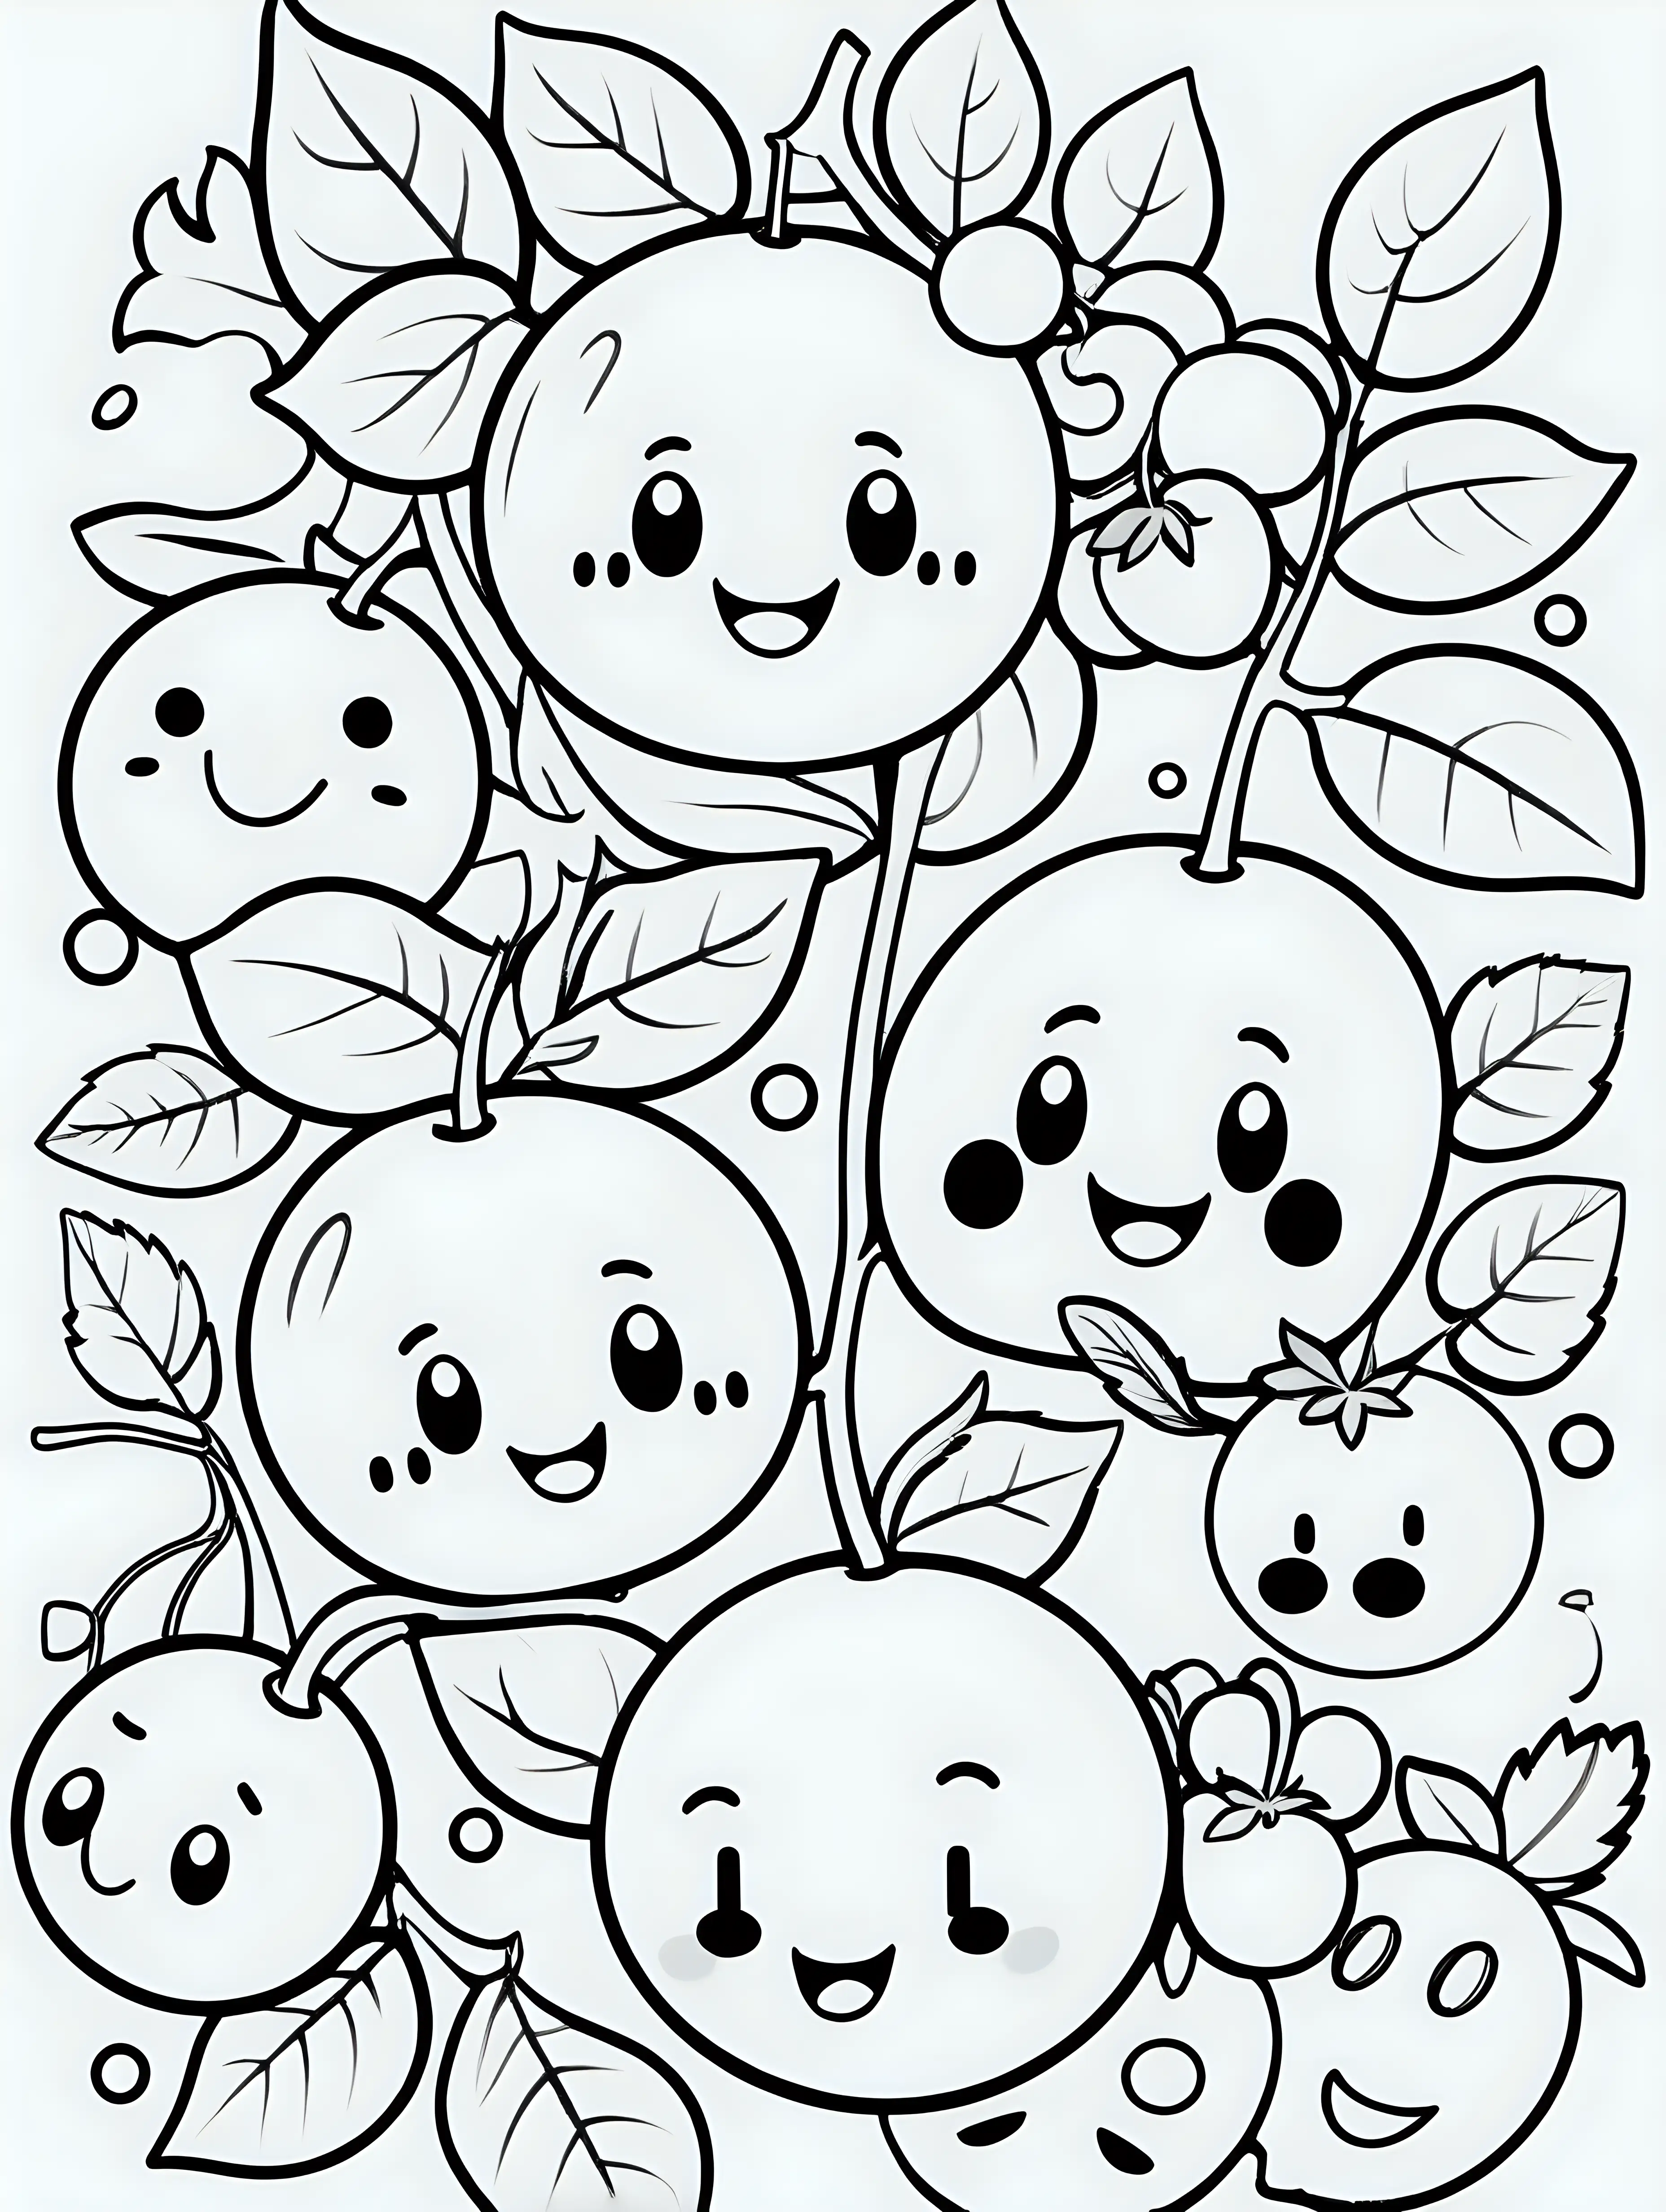 Adorable Cartoon Drawing of Clean Black and White Coloring Book with Cute Large Berries on White Background